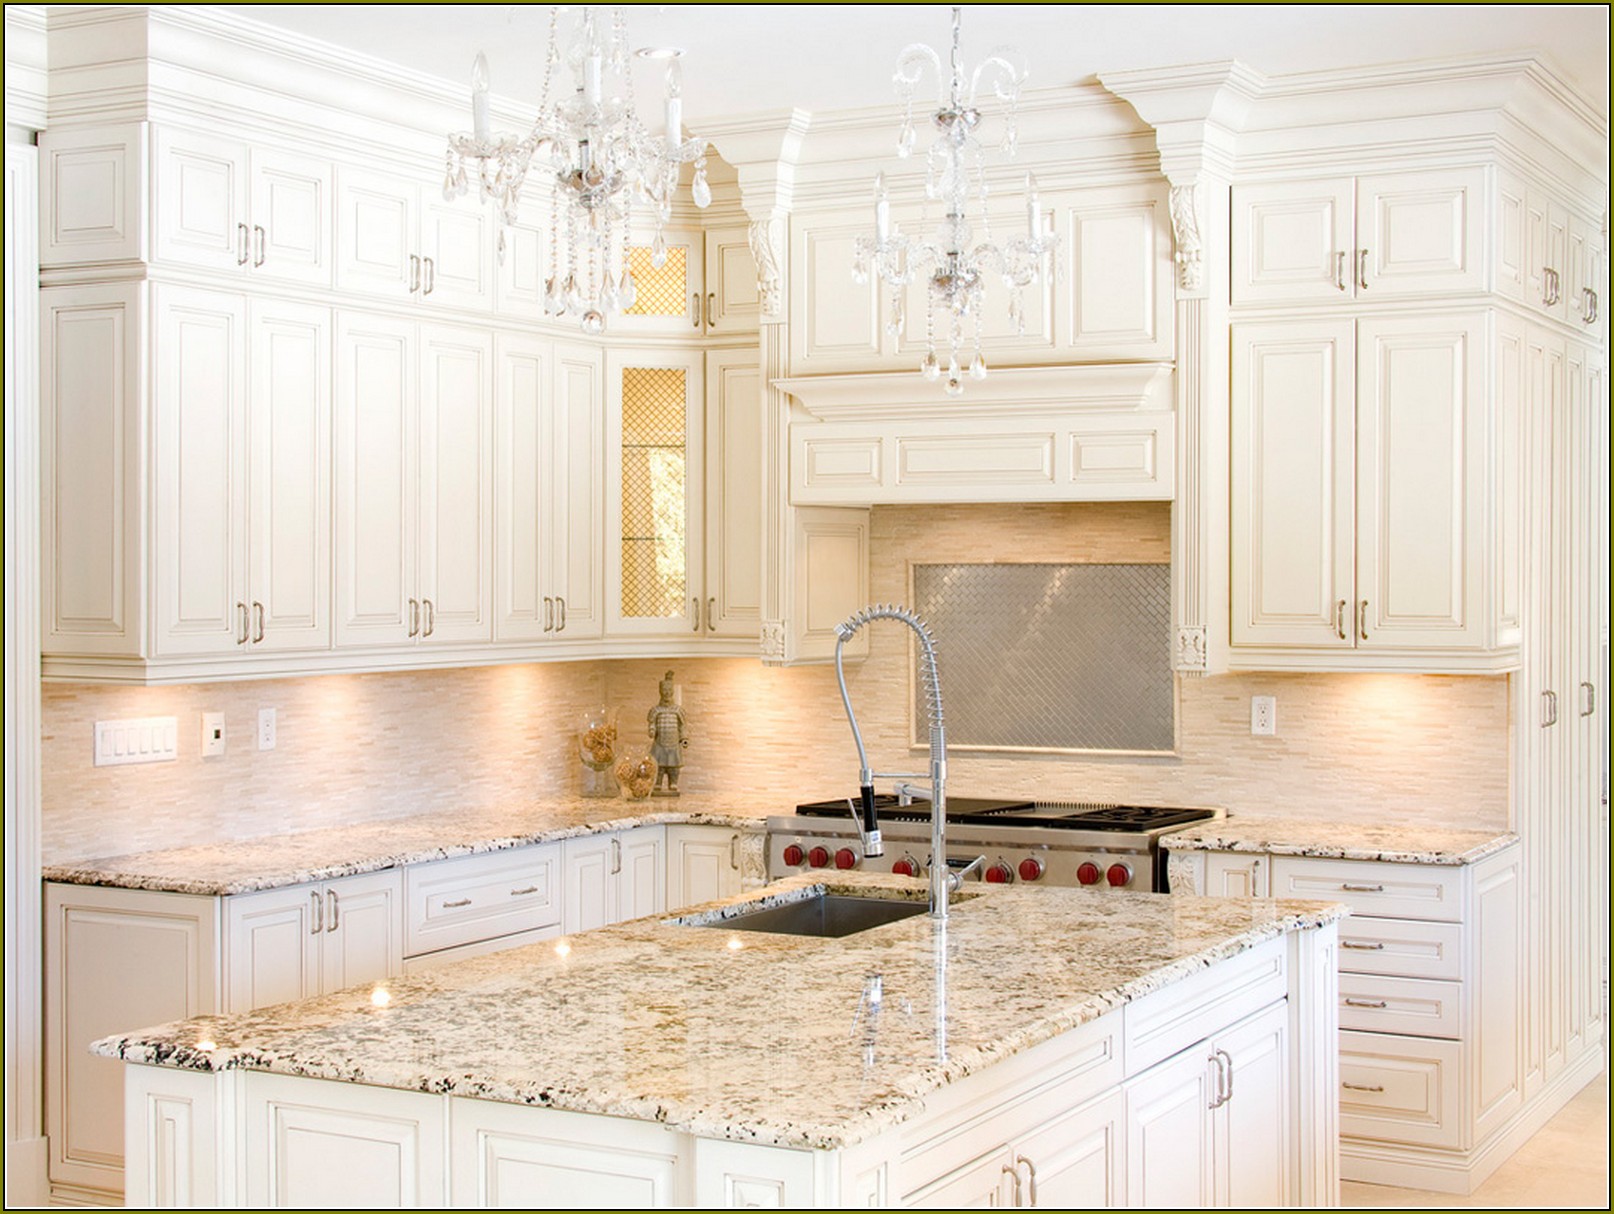 Off White Kitchen Cabinets With Granite Countertops